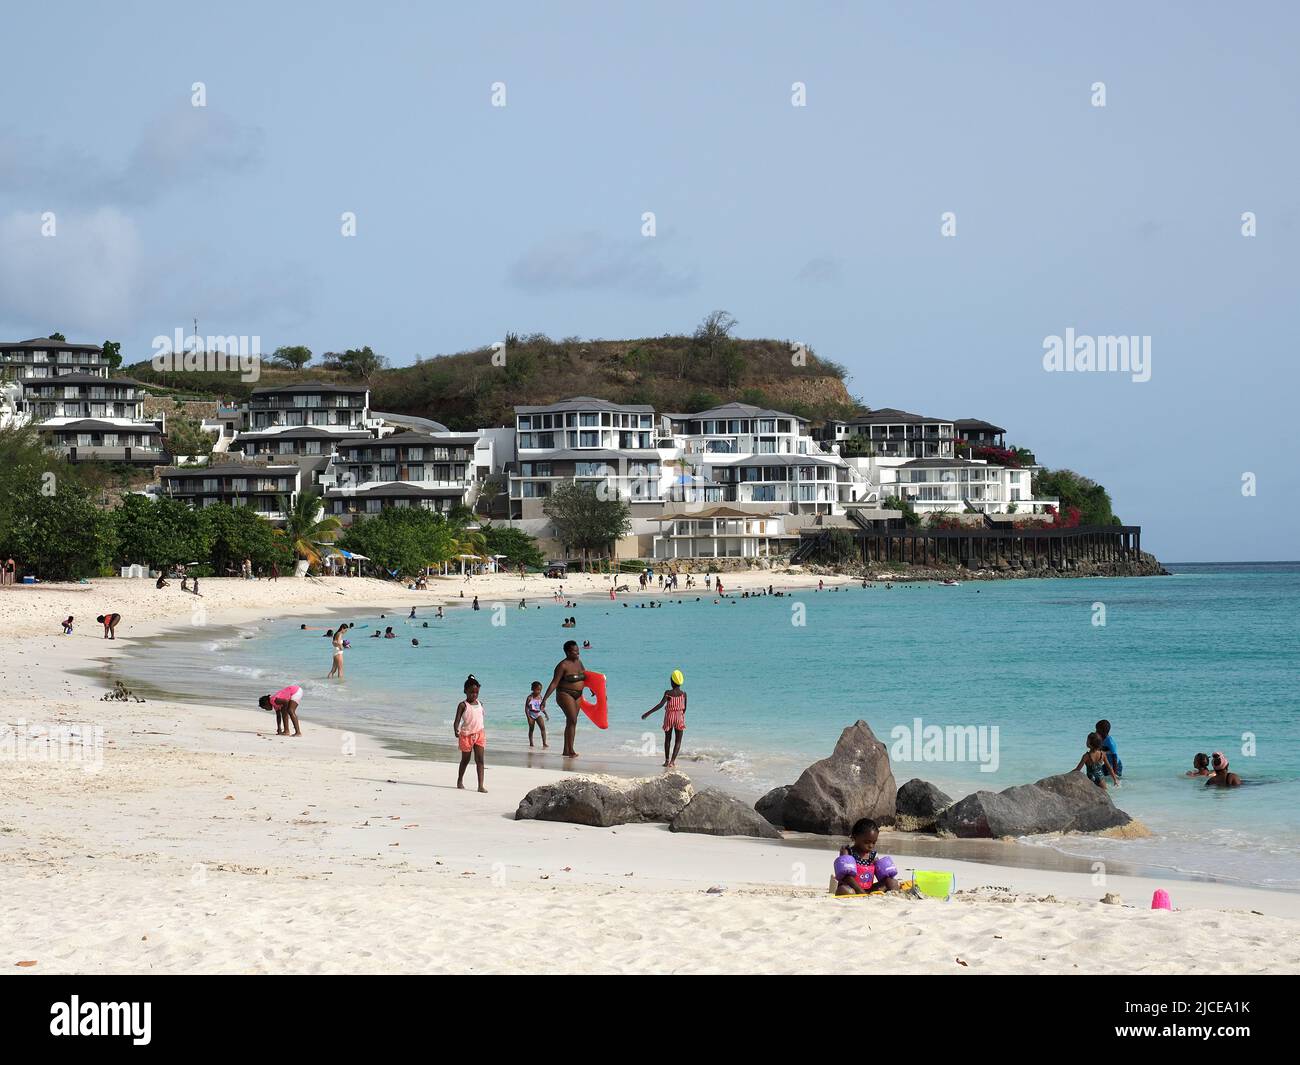 View along sandy Ffryes Beach in Antigua with the Tamarind Hills hotel resort in the background Stock Photo